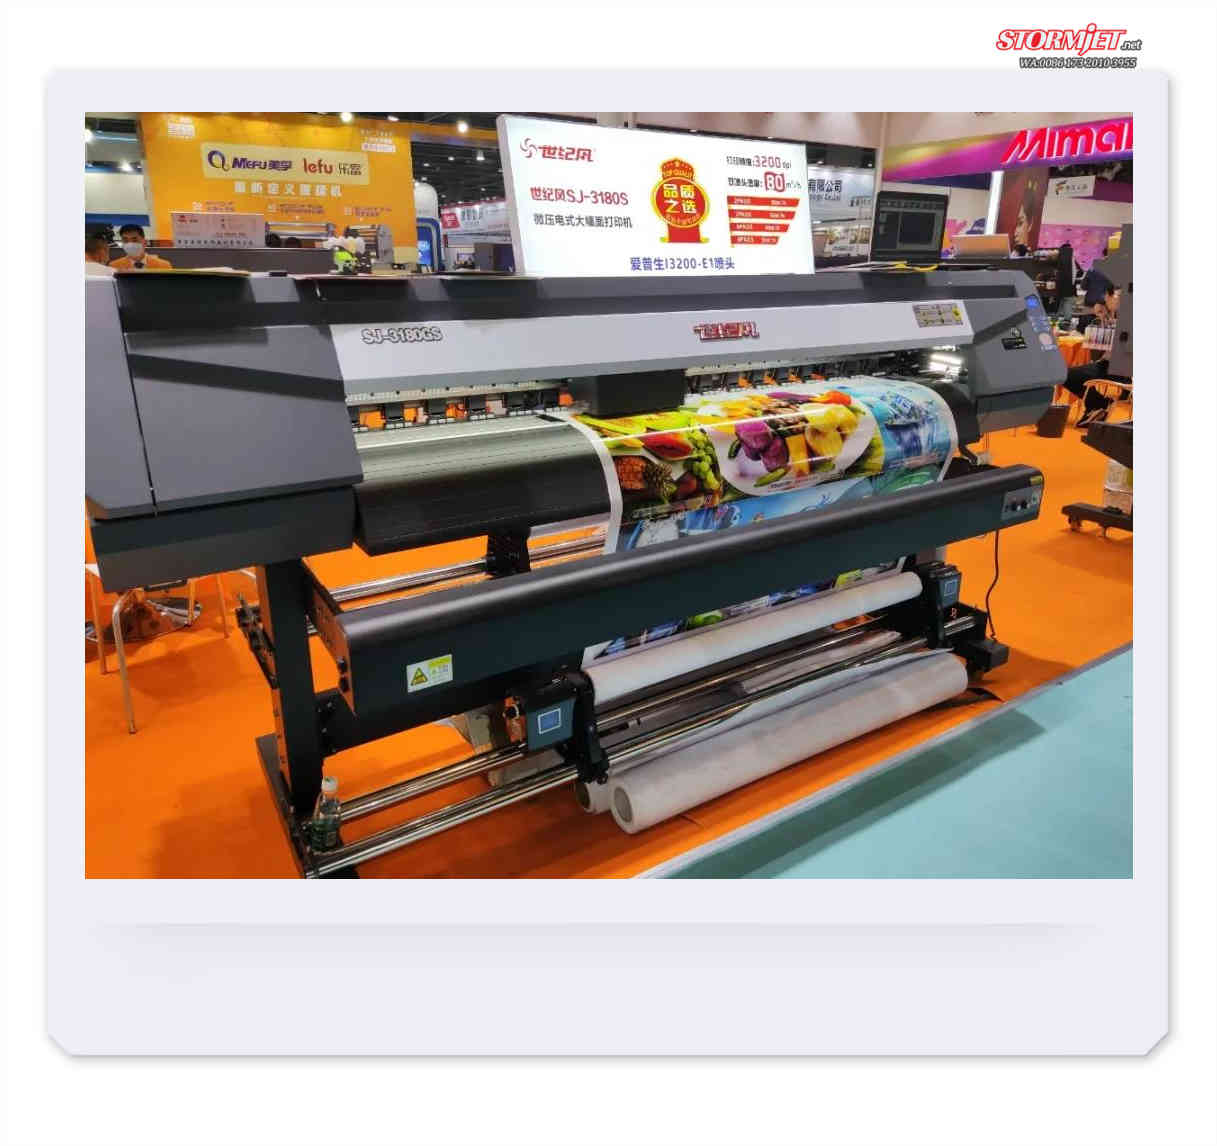 Classic Model Stormjet Eco Solvent Printer SJ3180TS In The 24th Guangzhou International Advertising Exhibition